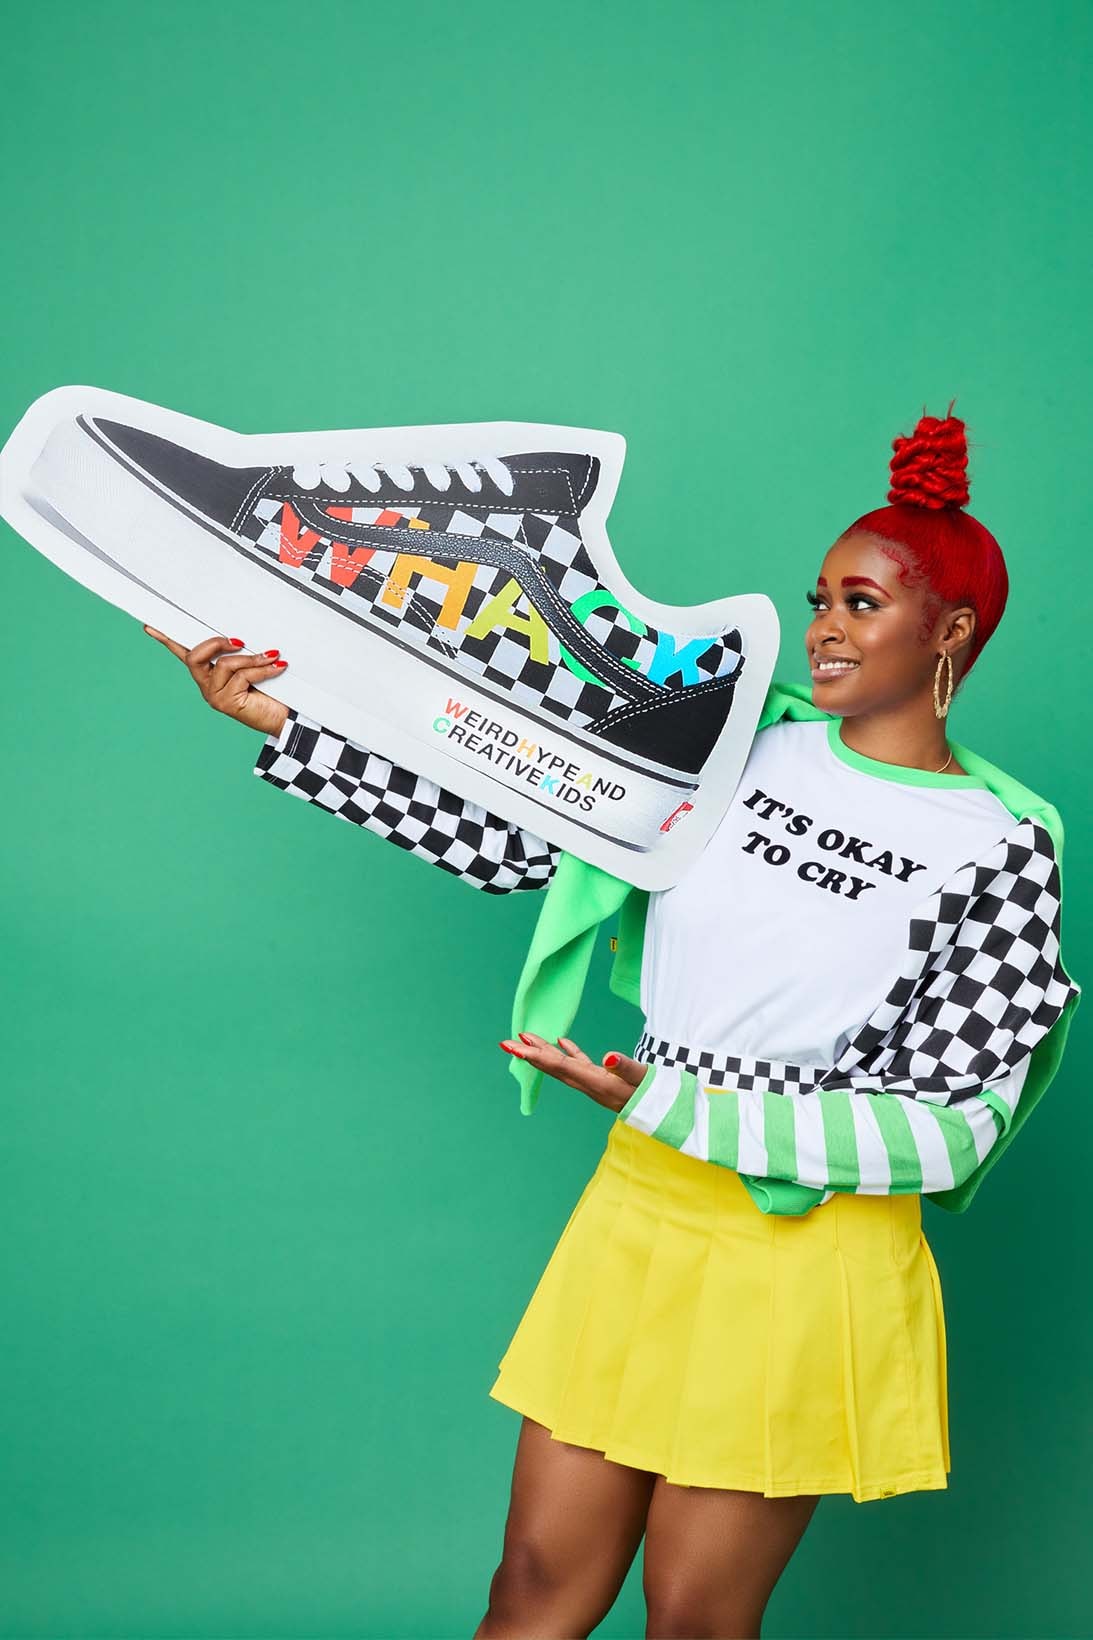 Vans Tierra Whack Old Skool It's Okay to Cry Shirt Collaboration